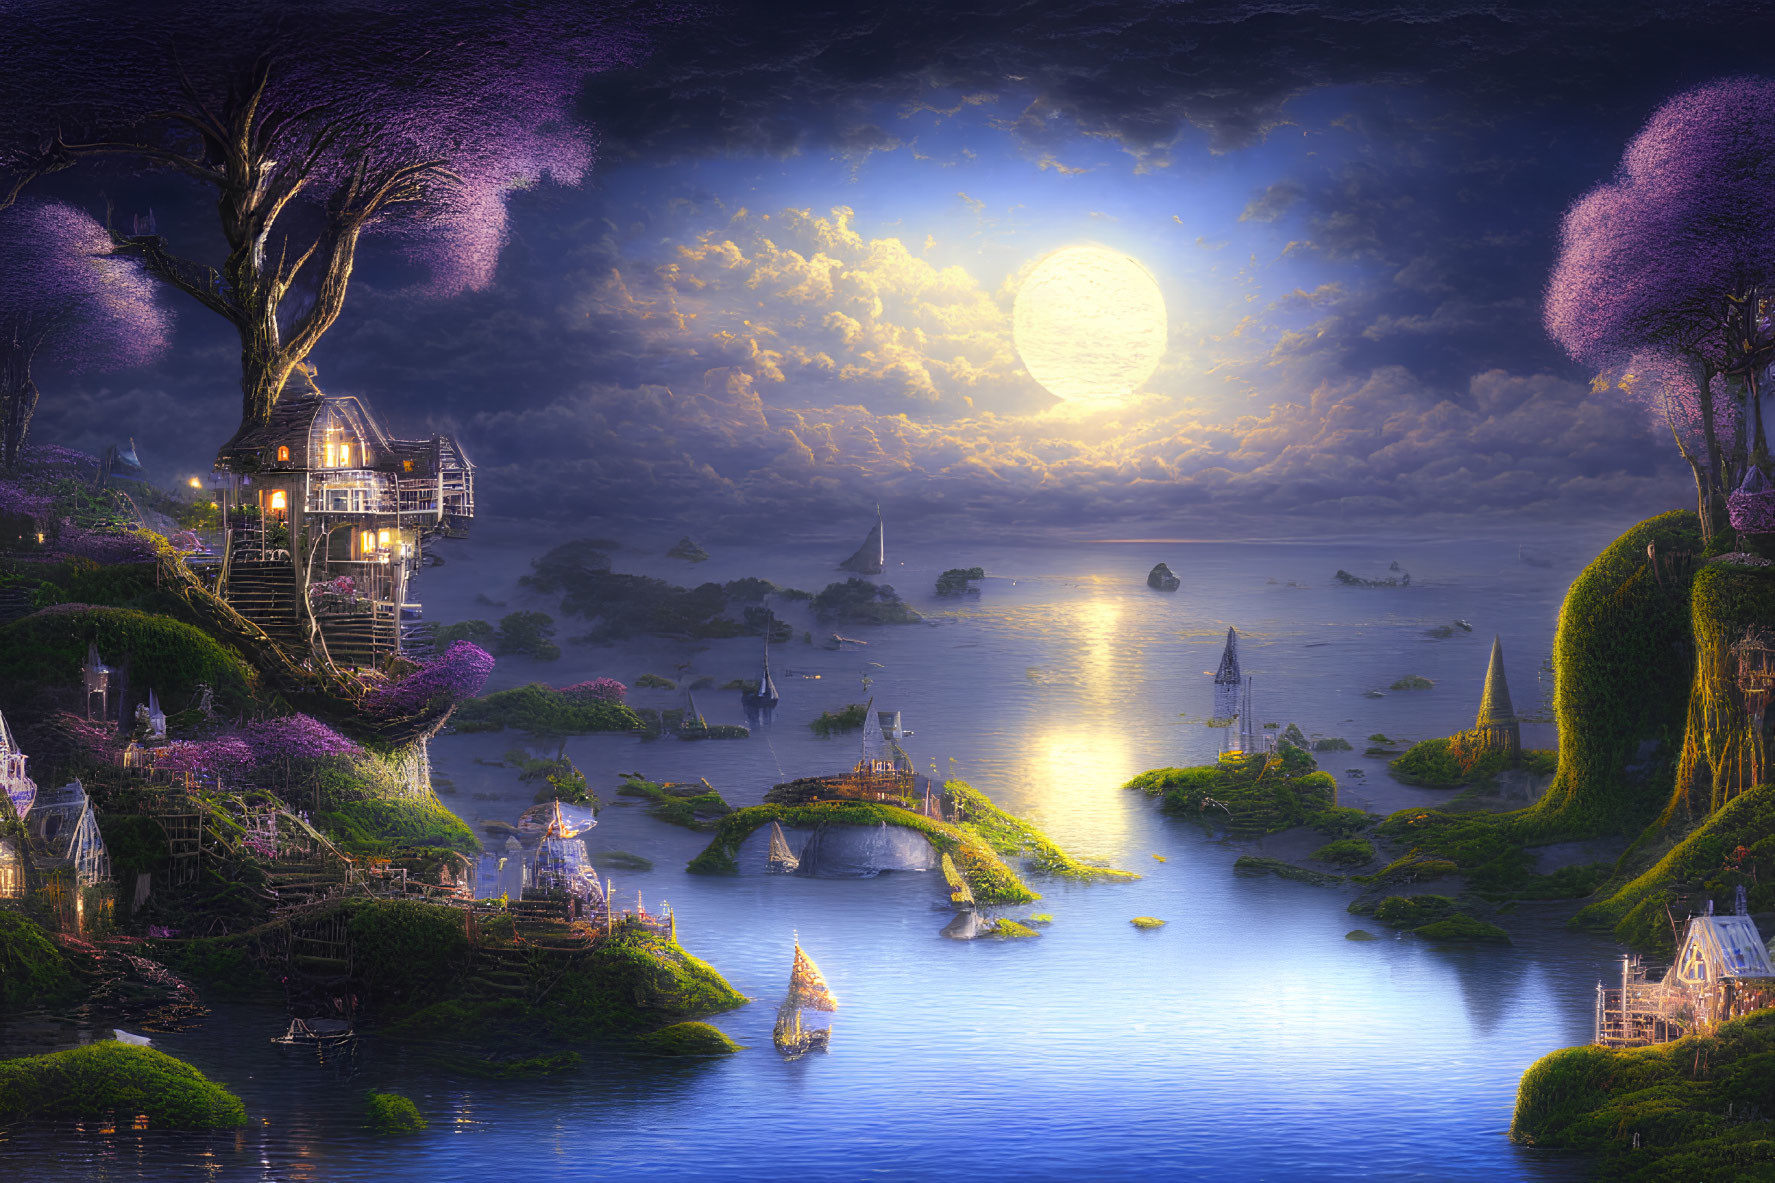 Nighttime fantasy landscape with glowing full moon, illuminated houses, hills, trees with purple foliage, and